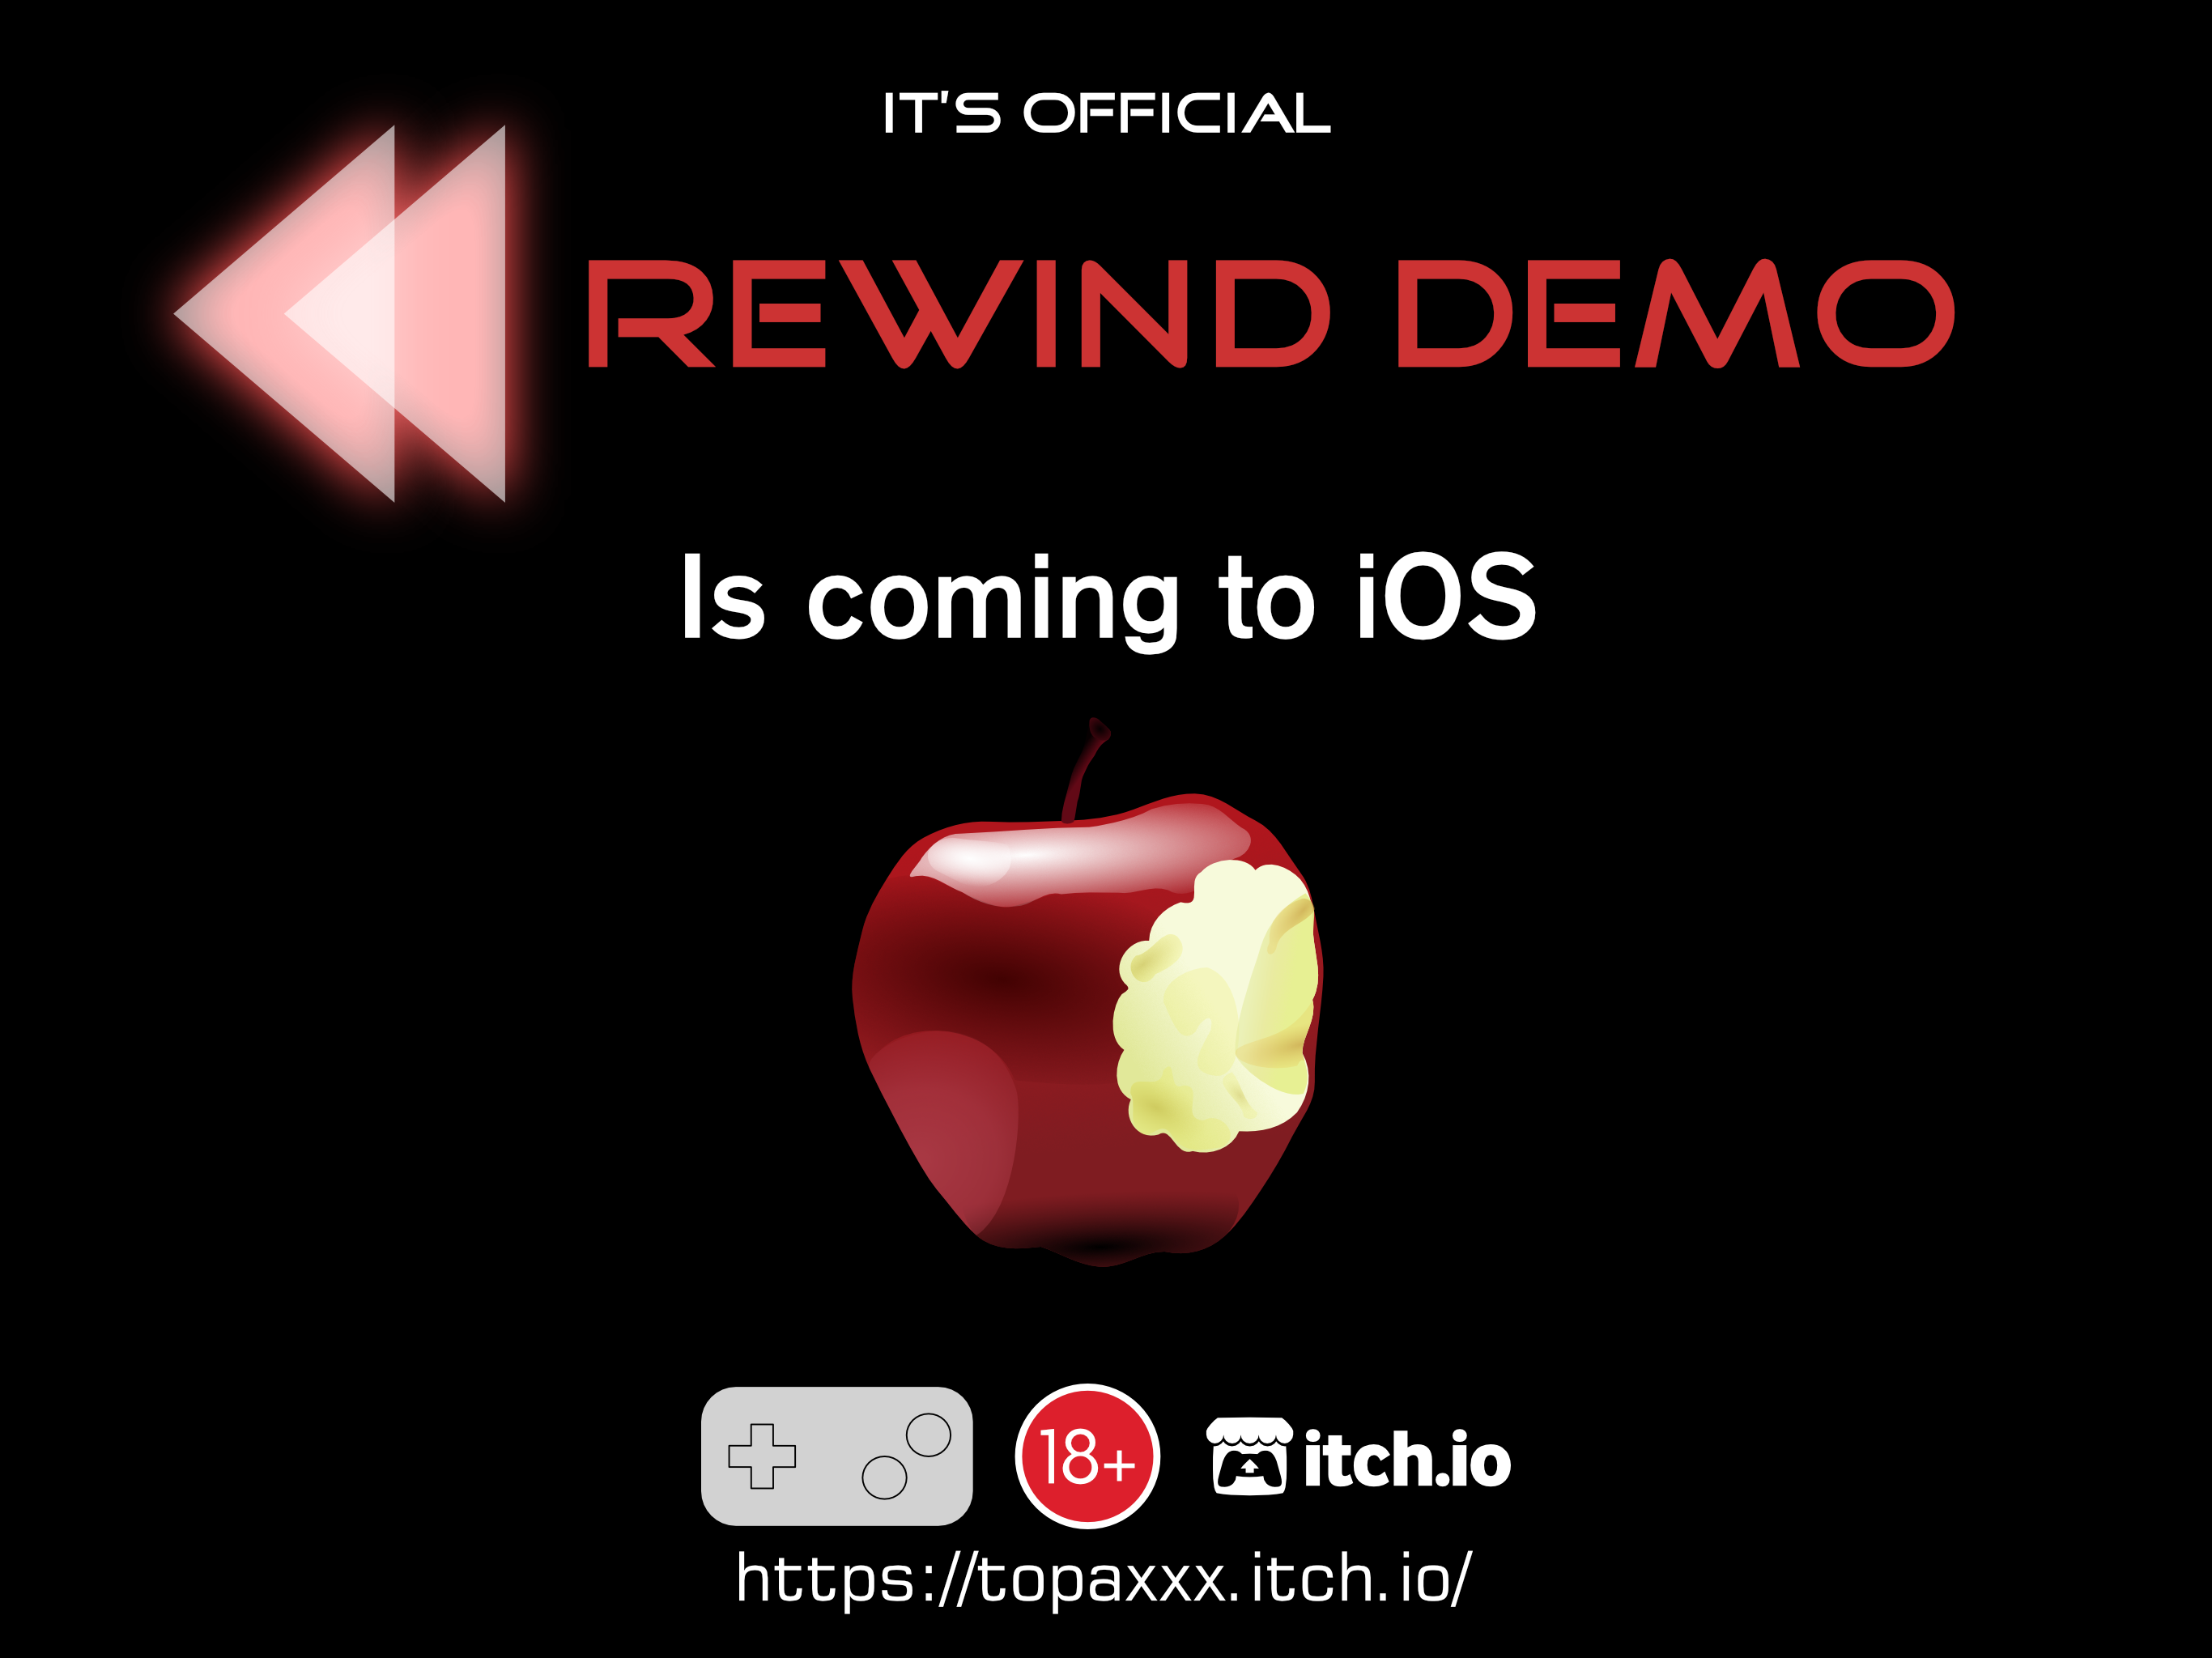 ⏪ Rewind Demo is coming to iOS in 2023